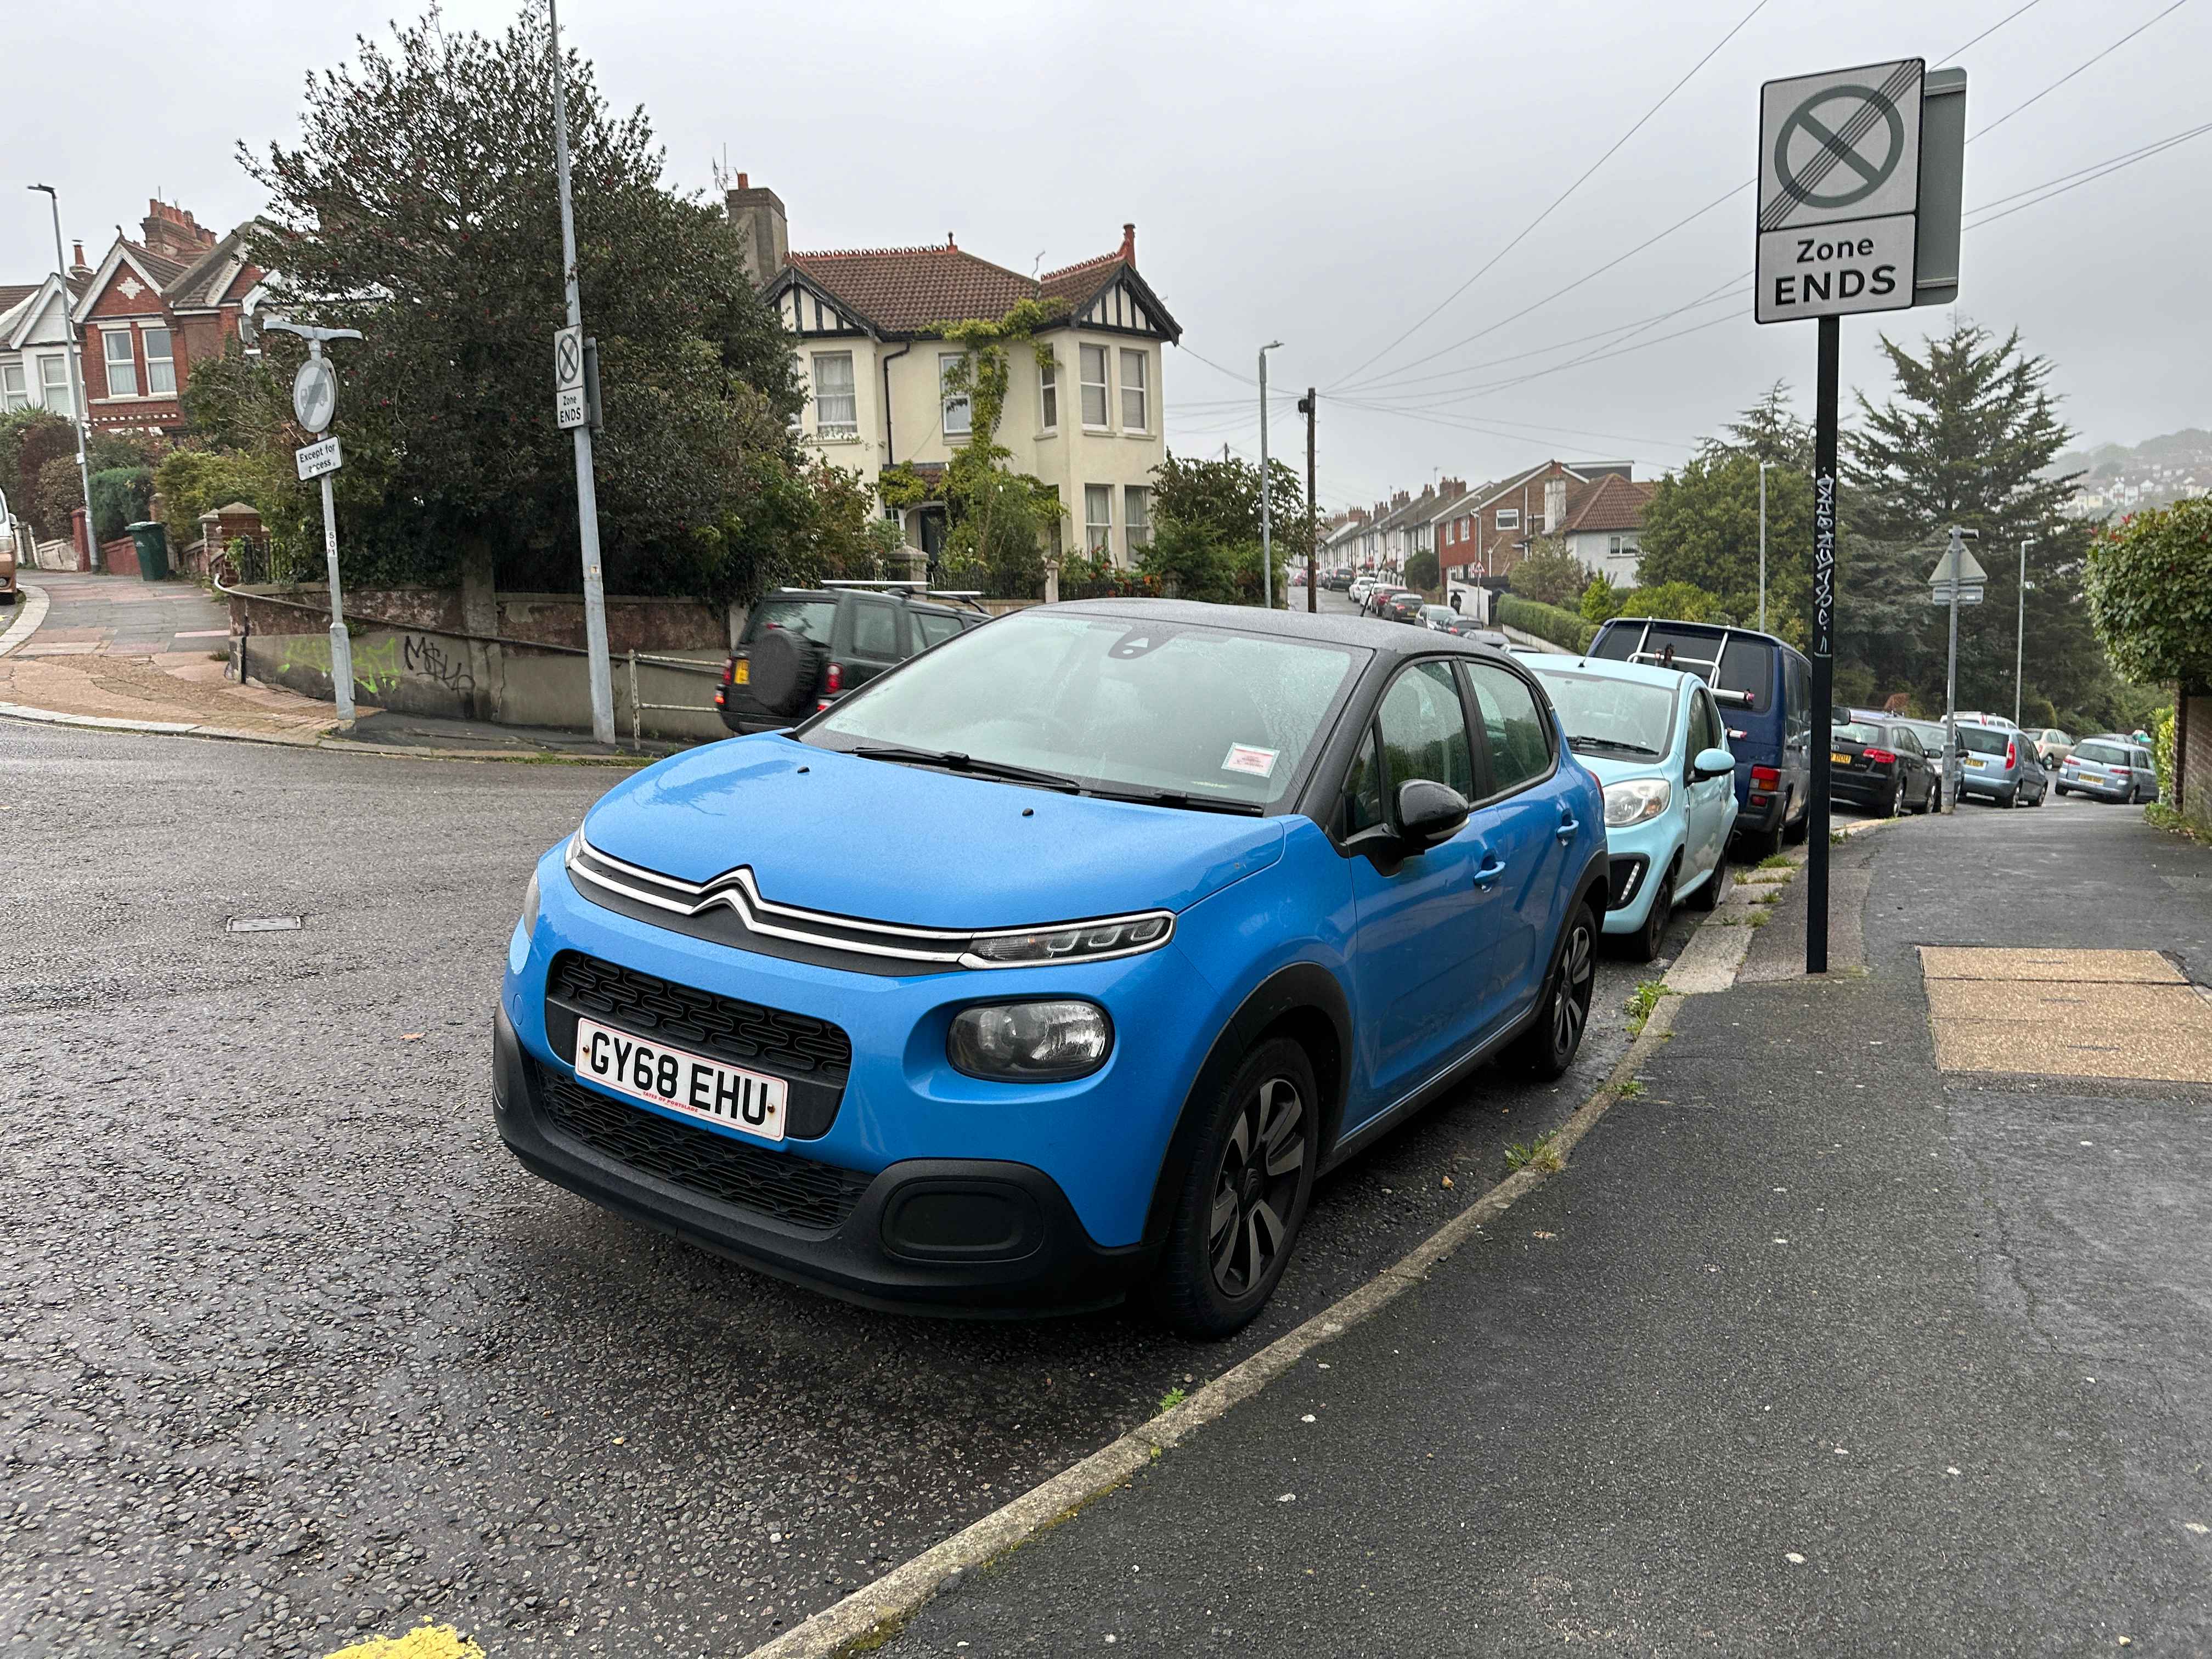 Photograph of GY68 EHU - a Blue Citroen C3 parked in Hollingdean by a non-resident who uses the local area as part of their Brighton commute. The fifth of twelve photographs supplied by the residents of Hollingdean.